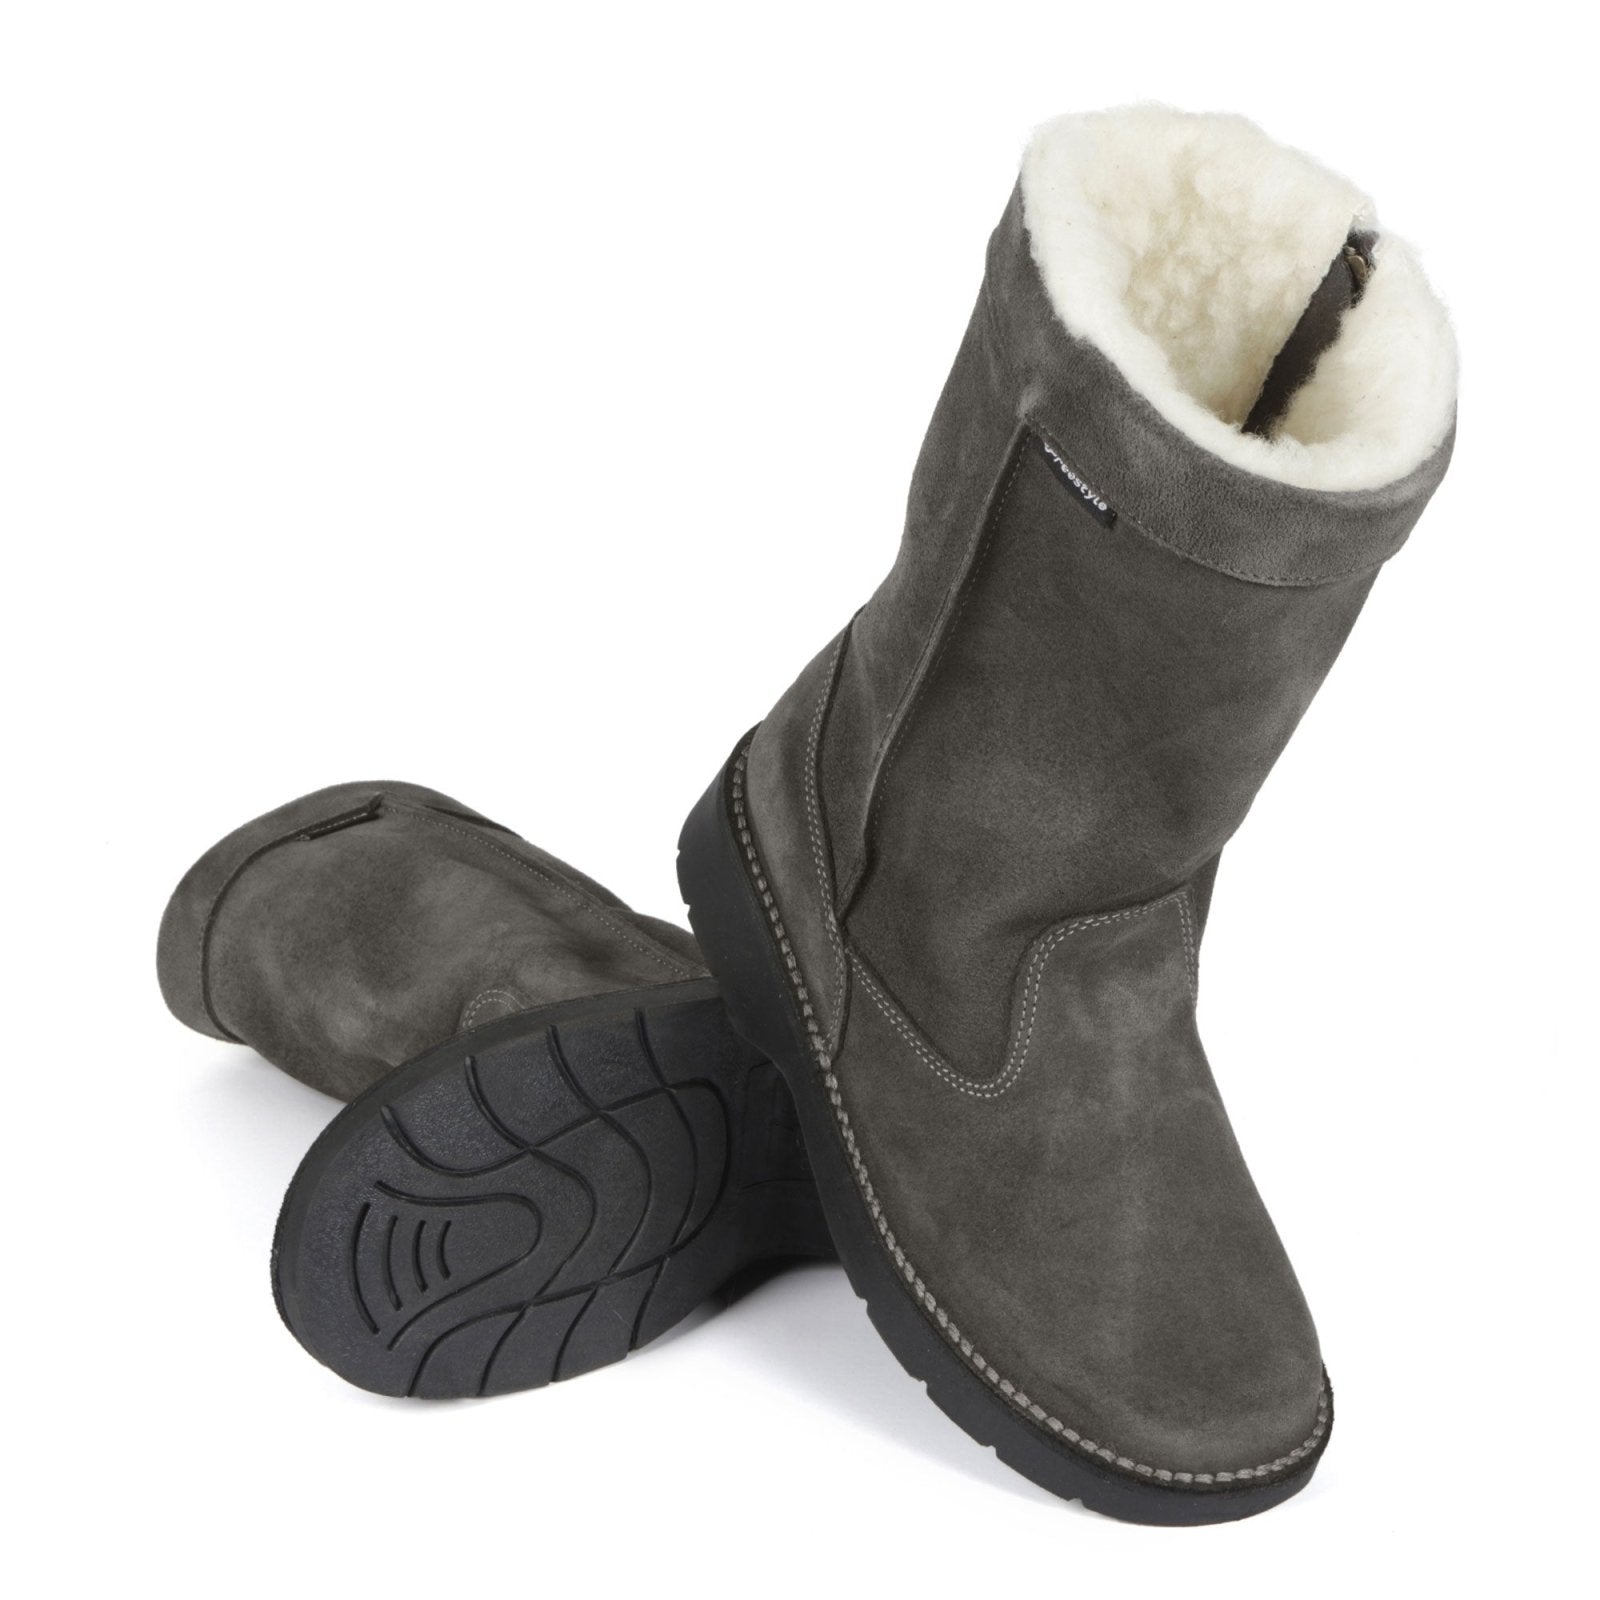 Polar Surf Boot Locally Handmade Premium Suede 100% Wool-lined - Freestyle SA Proudly local leather boots veldskoens vellies leather shoes suede veldskoens